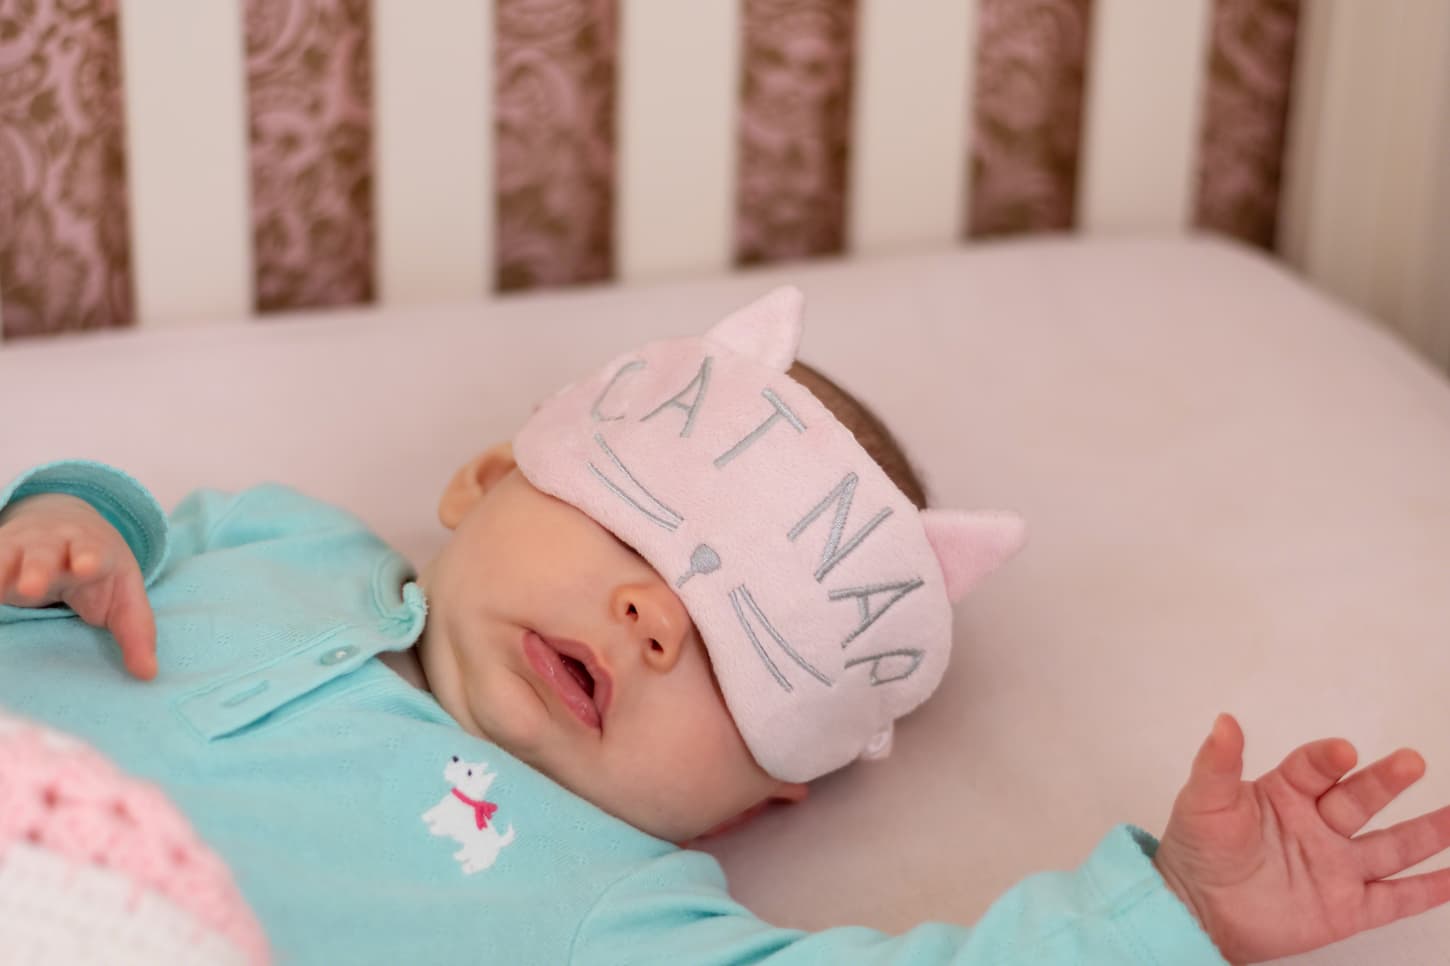 An image of a Baby in a crib wearing a sleep mask that says Cat Nap.